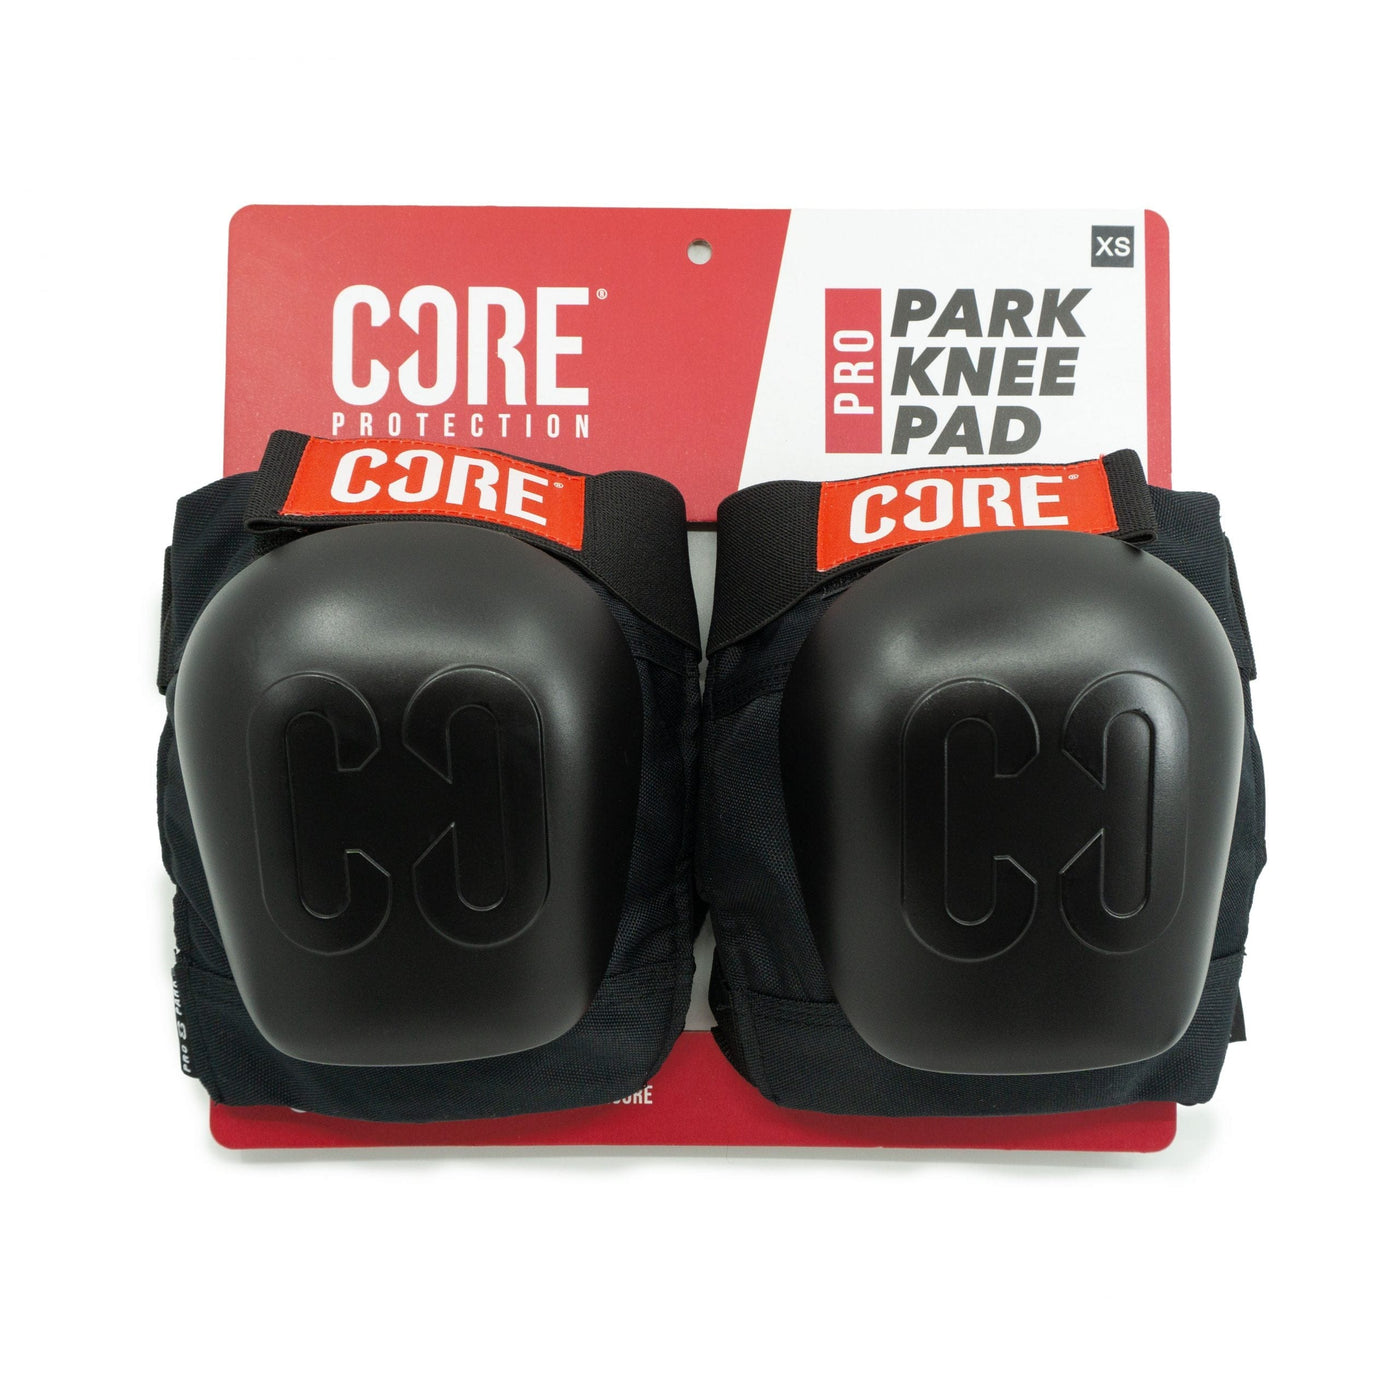 Core Pro Park Skate Knee Pads I Knee Pad Skates Product and Packaging